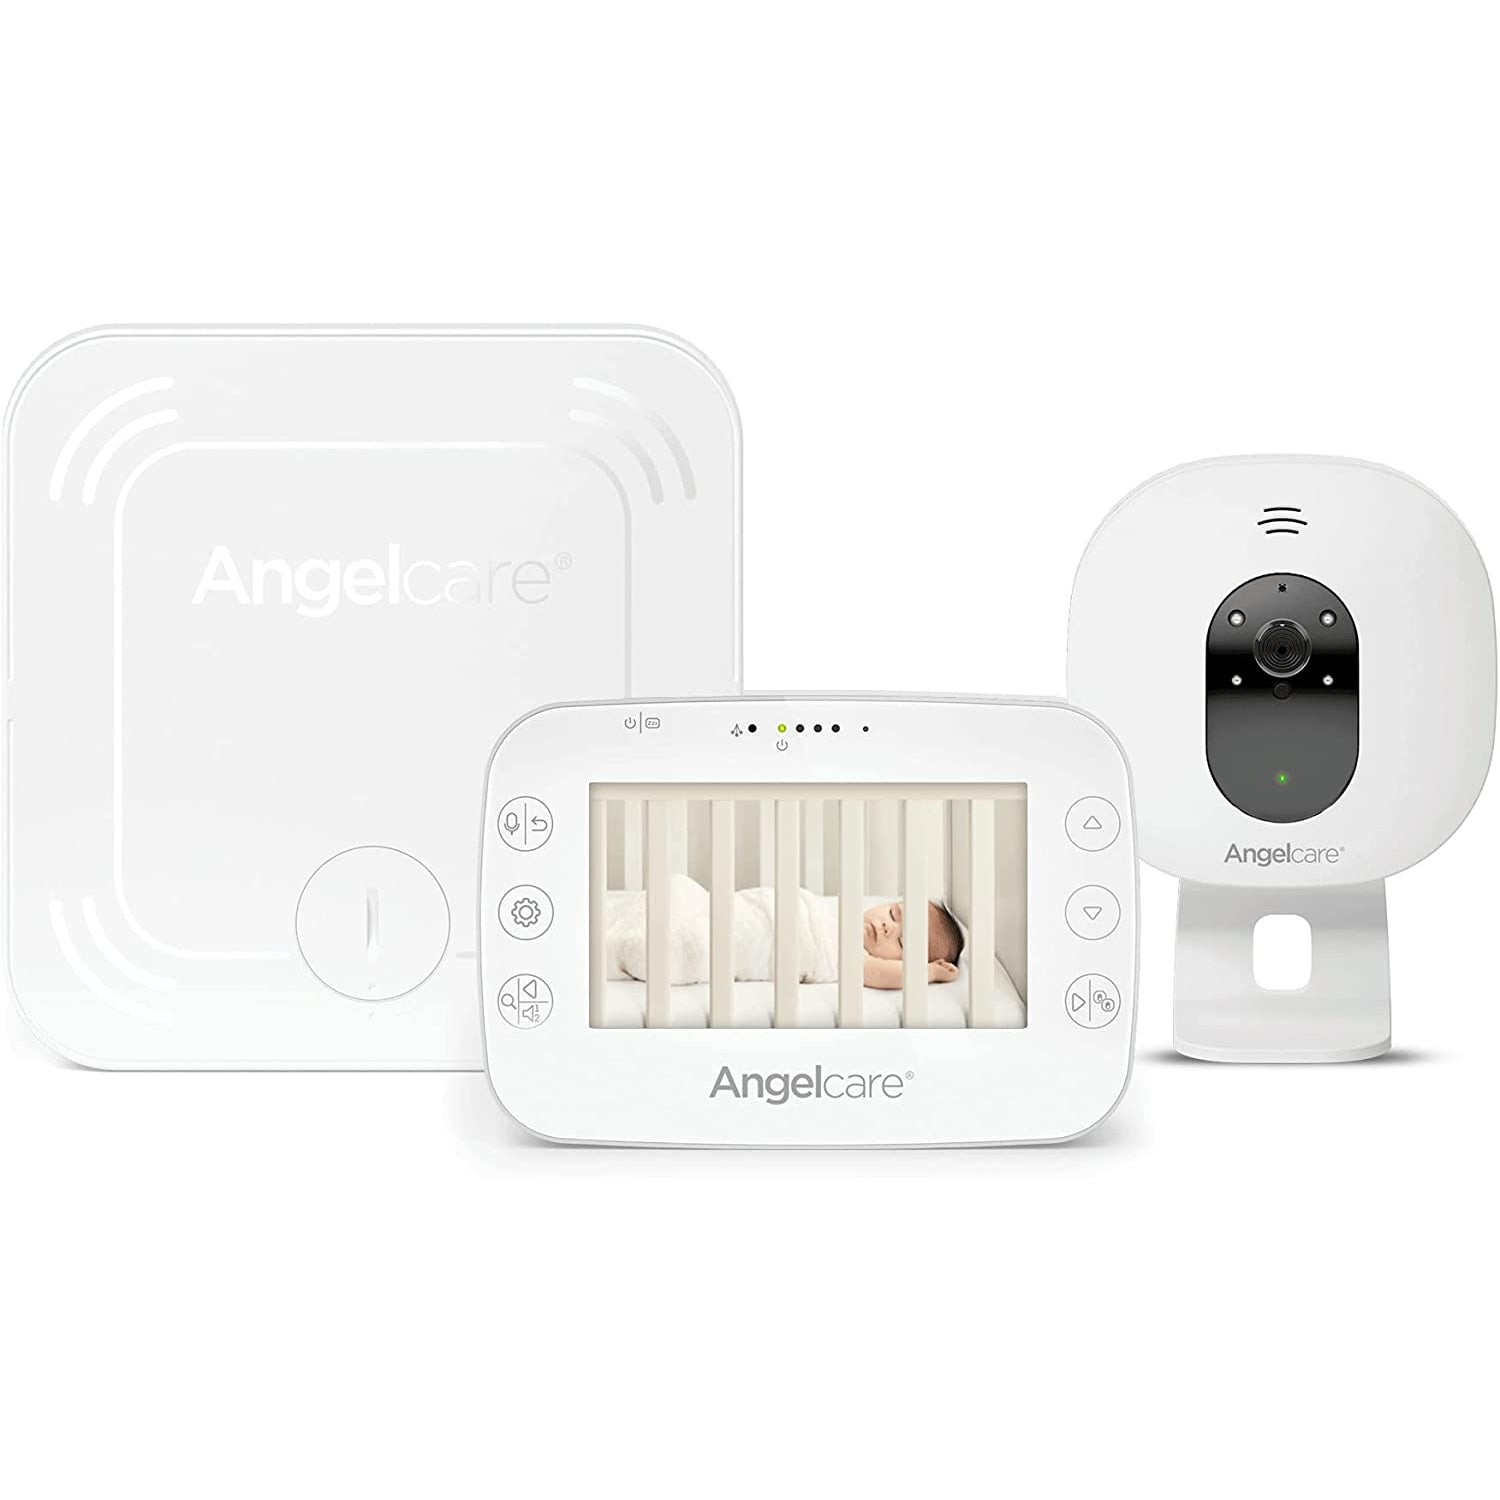 Angelcare AC327 Baby Movement Monitor with Video & Sound - White - Refurbished Good